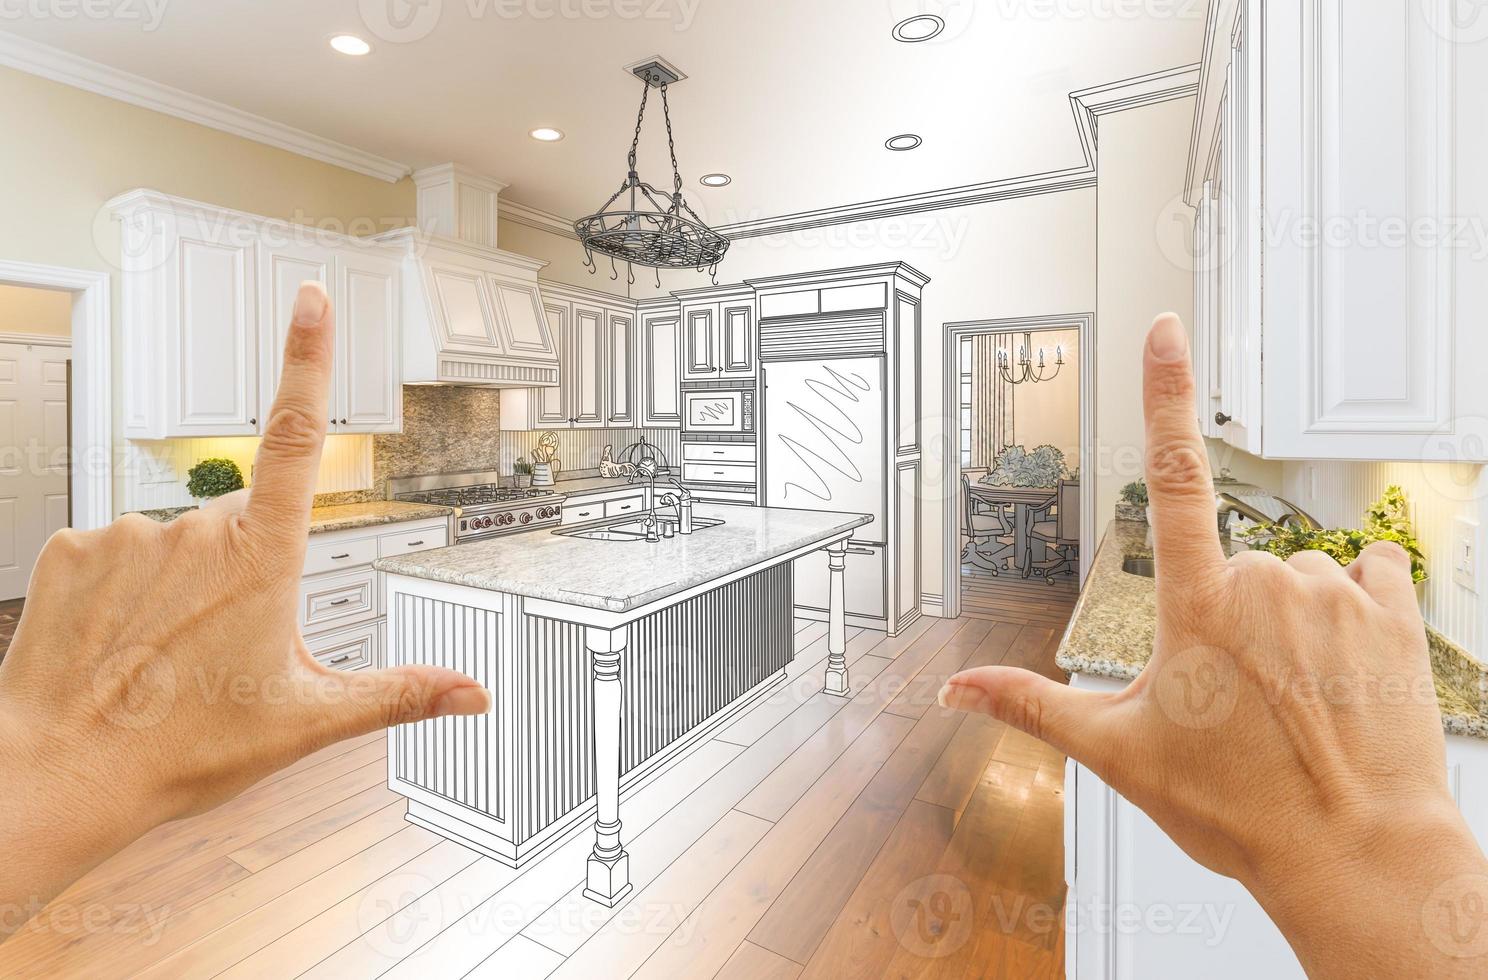 Hands Framing Gradated Custom Kitchen Design Drawing and Photo Combination